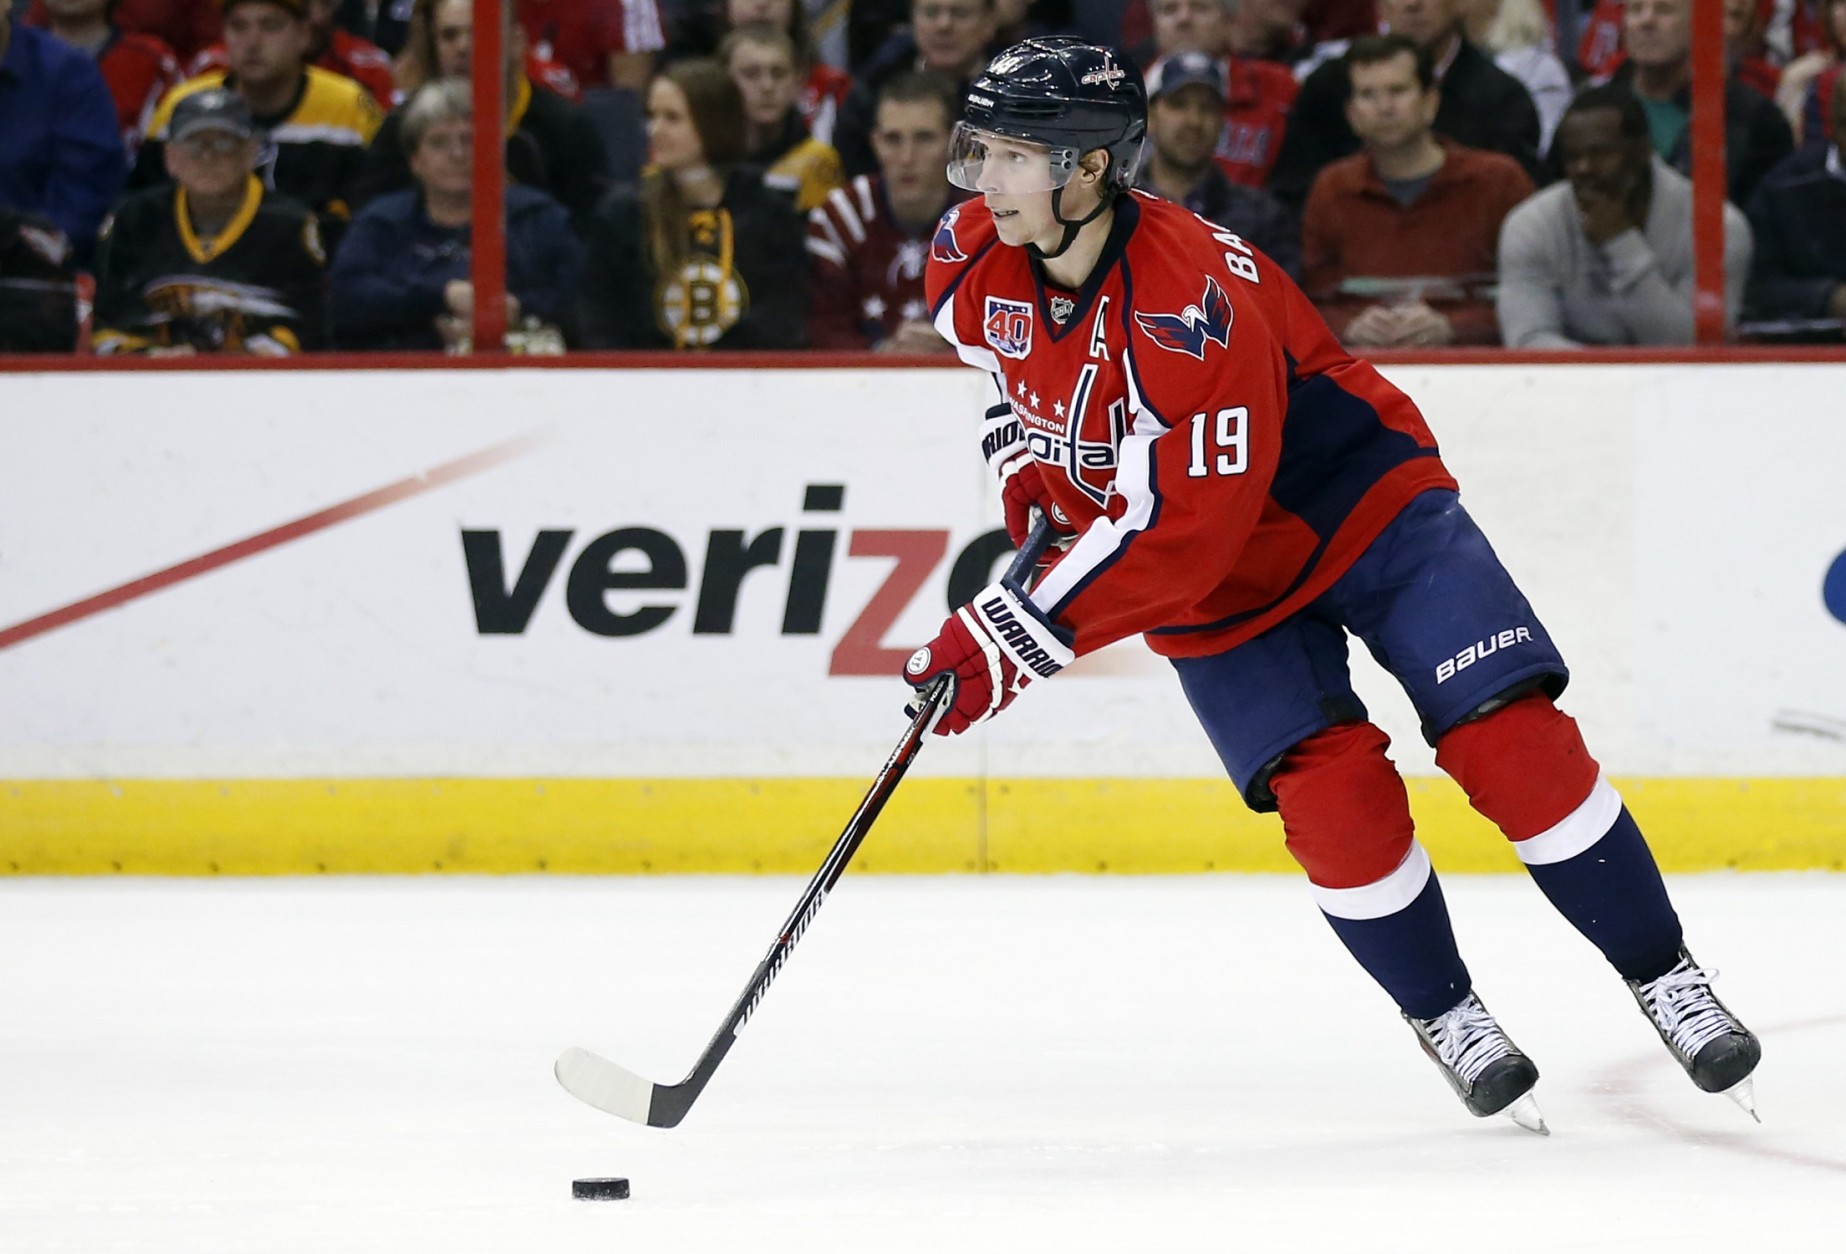 Washington Capitals center Nicklas Backstrom (19), from Sweden, looks to pass the puck in the second period of an NHL hockey game against the Boston Bruins, Sunday, March 15, 2015, in Washington. (AP Photo/Alex Brandon)